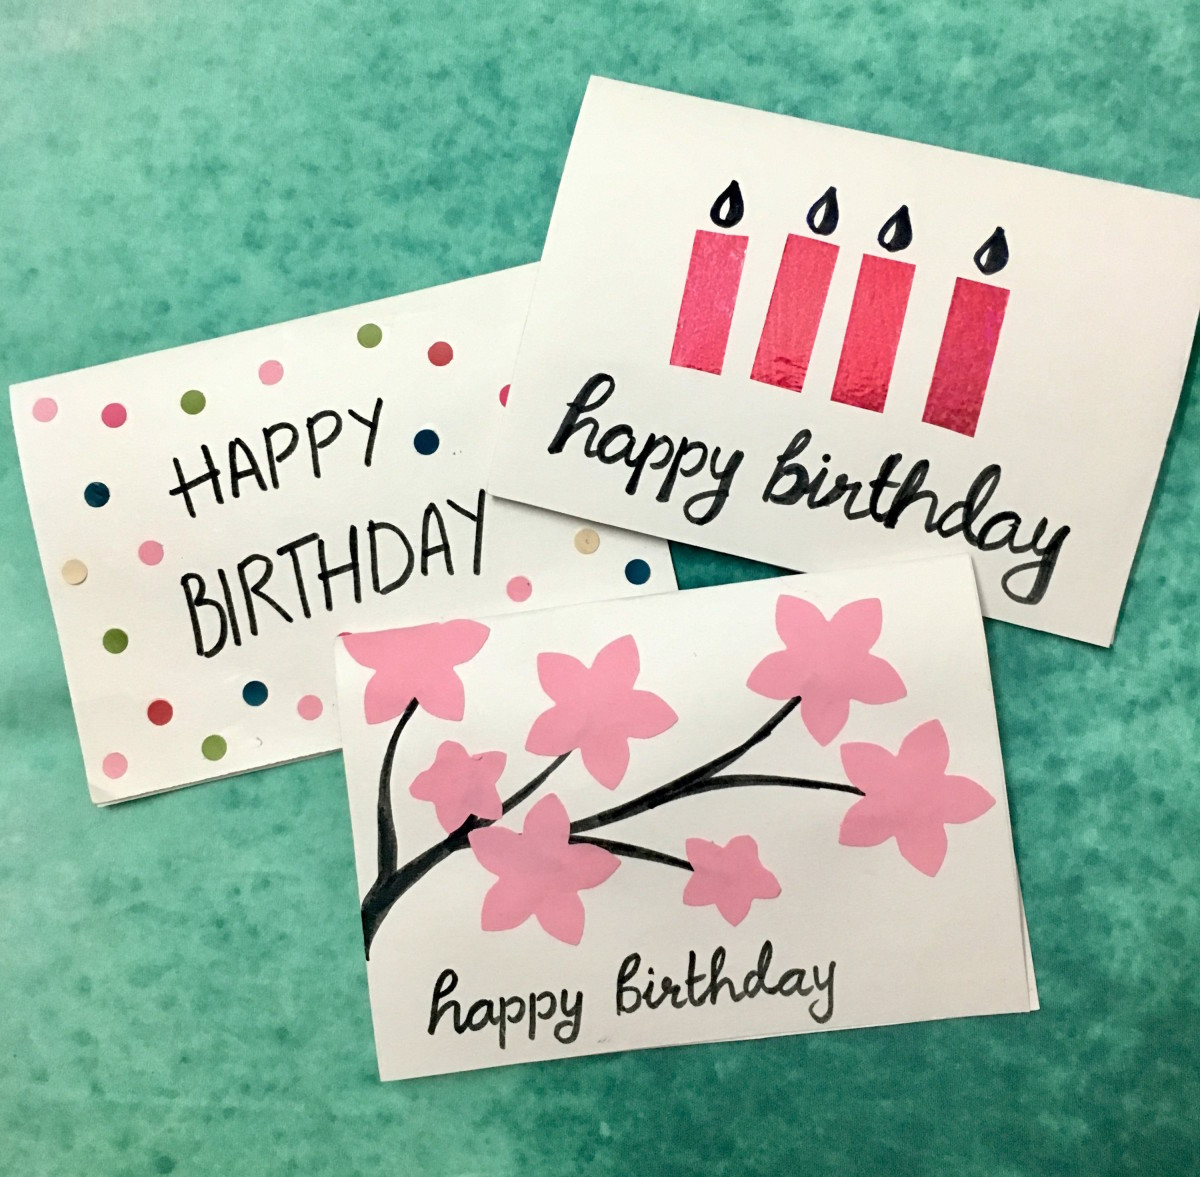 How To Make Birthday Cards
 3 Easy 5 Minute DIY Birthday Greeting Cards